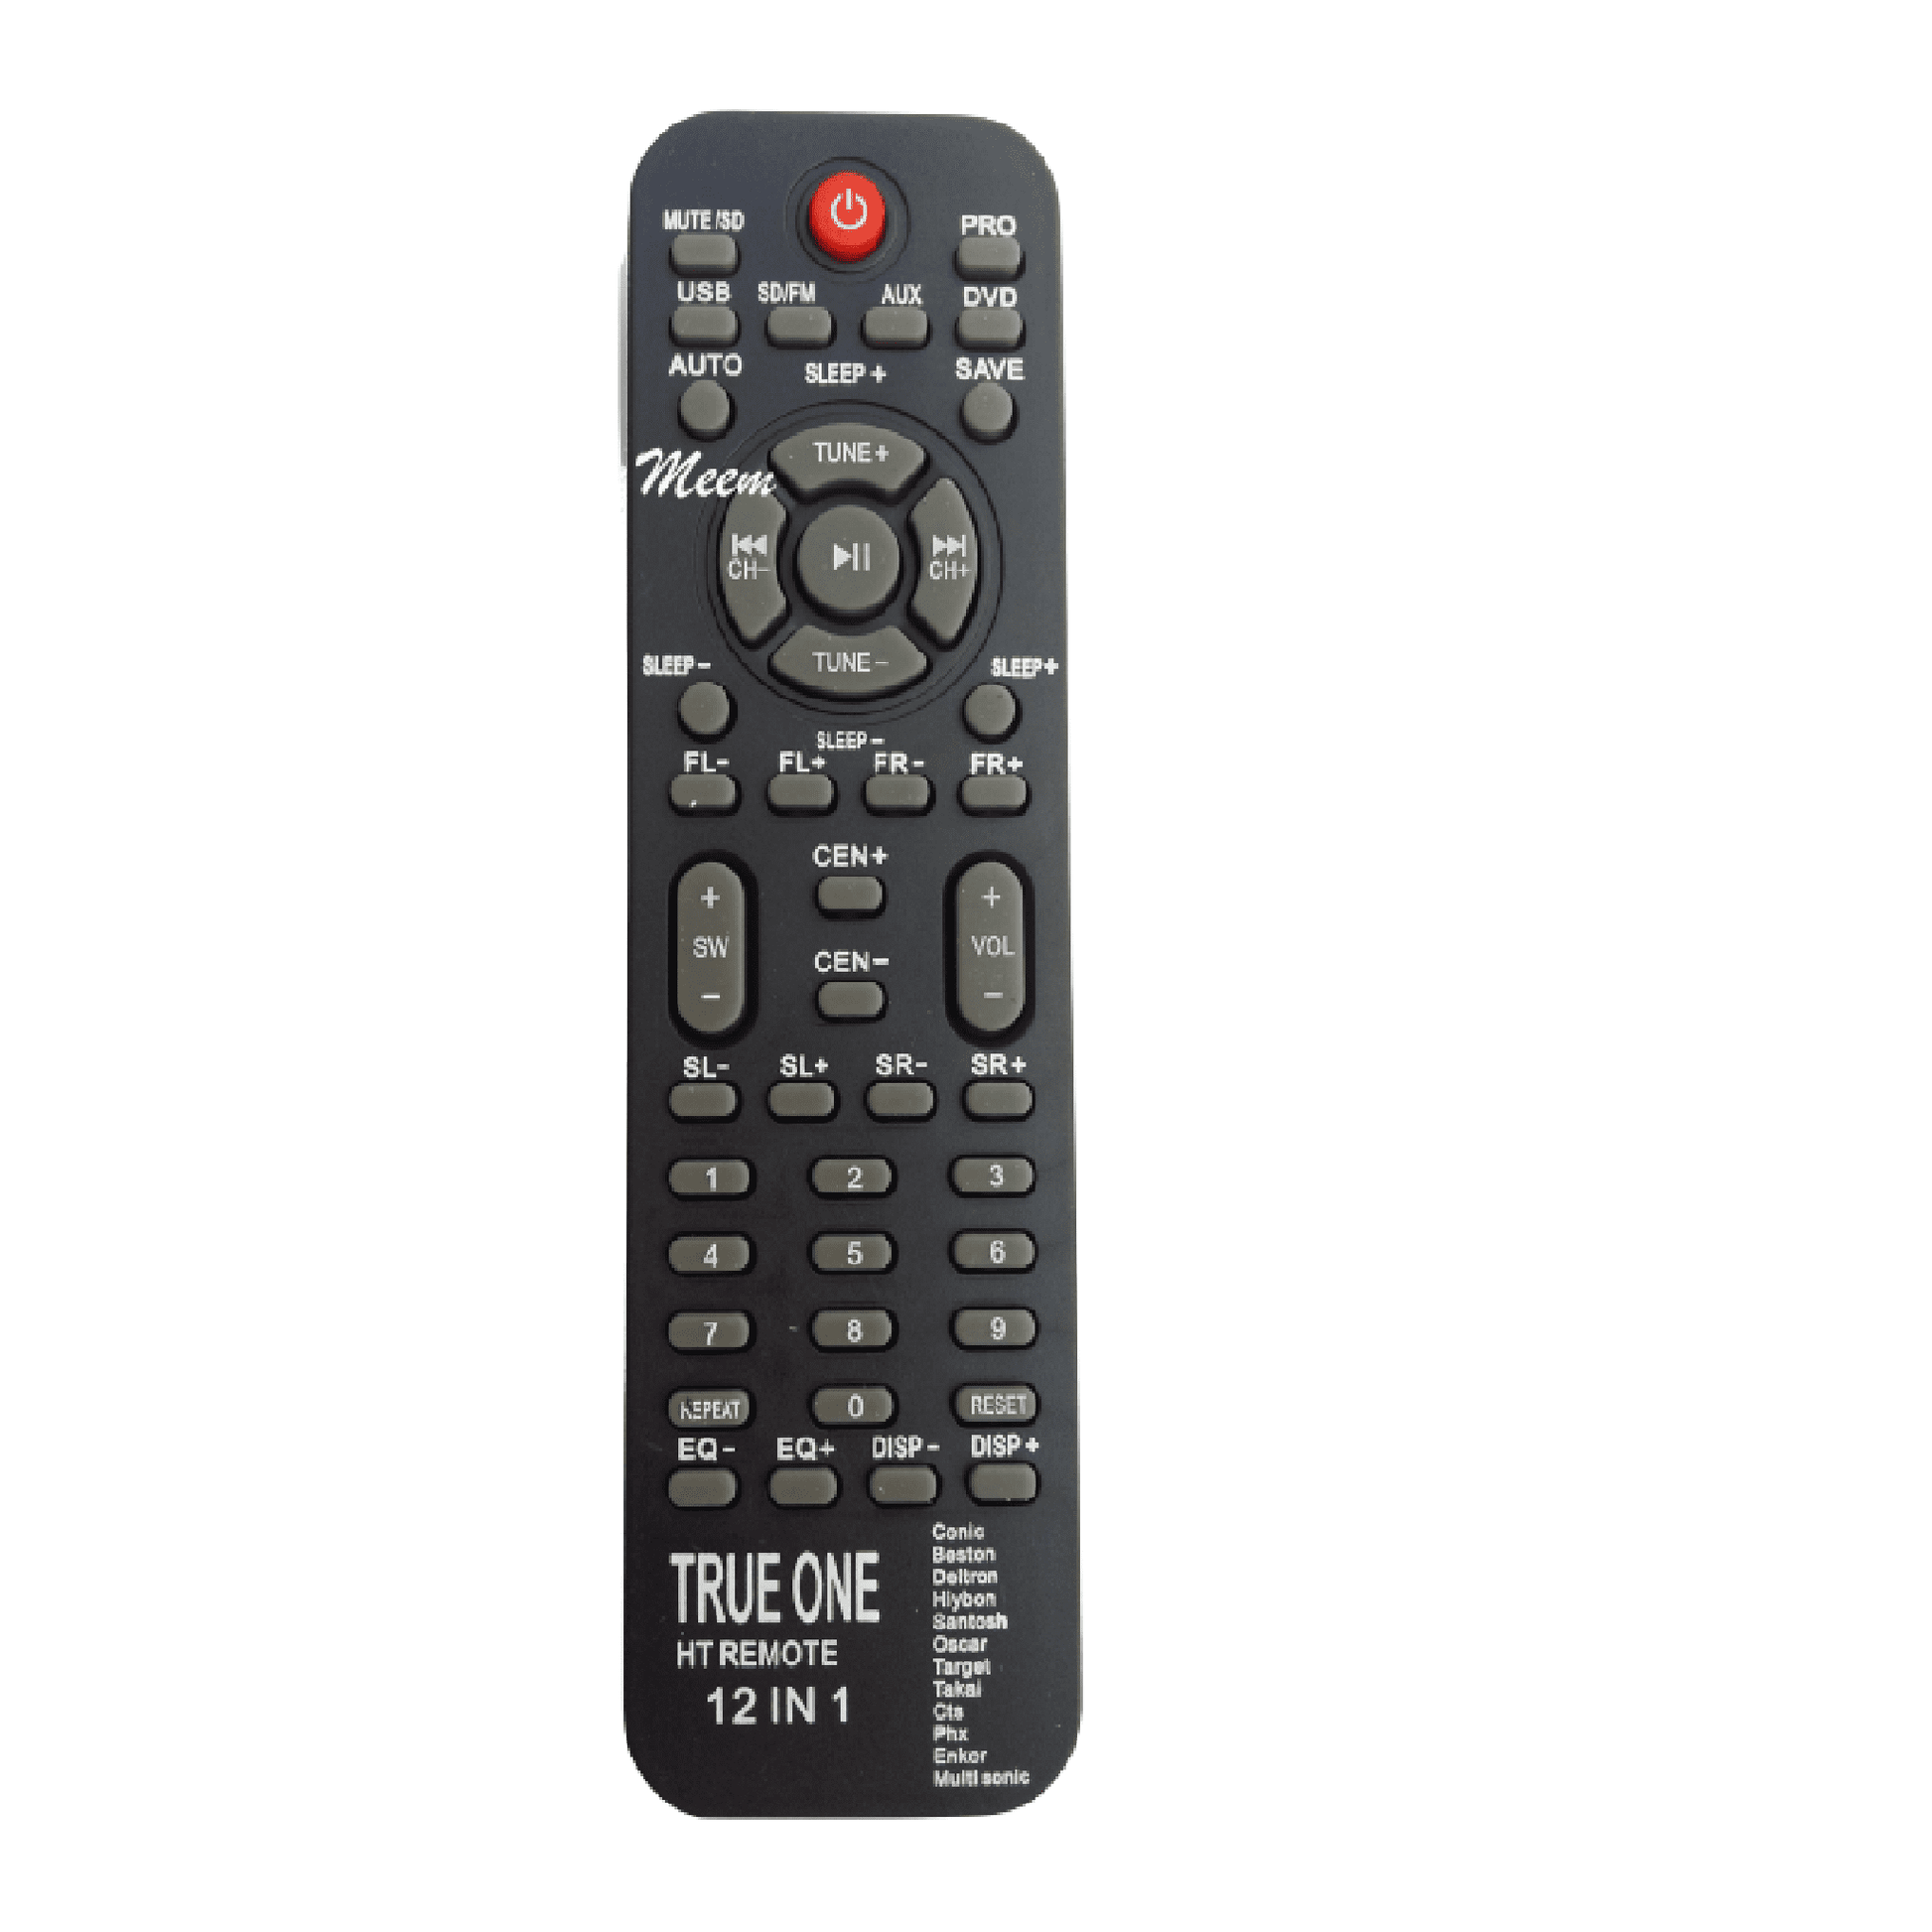 12 in 1 Home Theater Remote Control Suitable for Target, Tekai, Cts (HM05) - Faritha